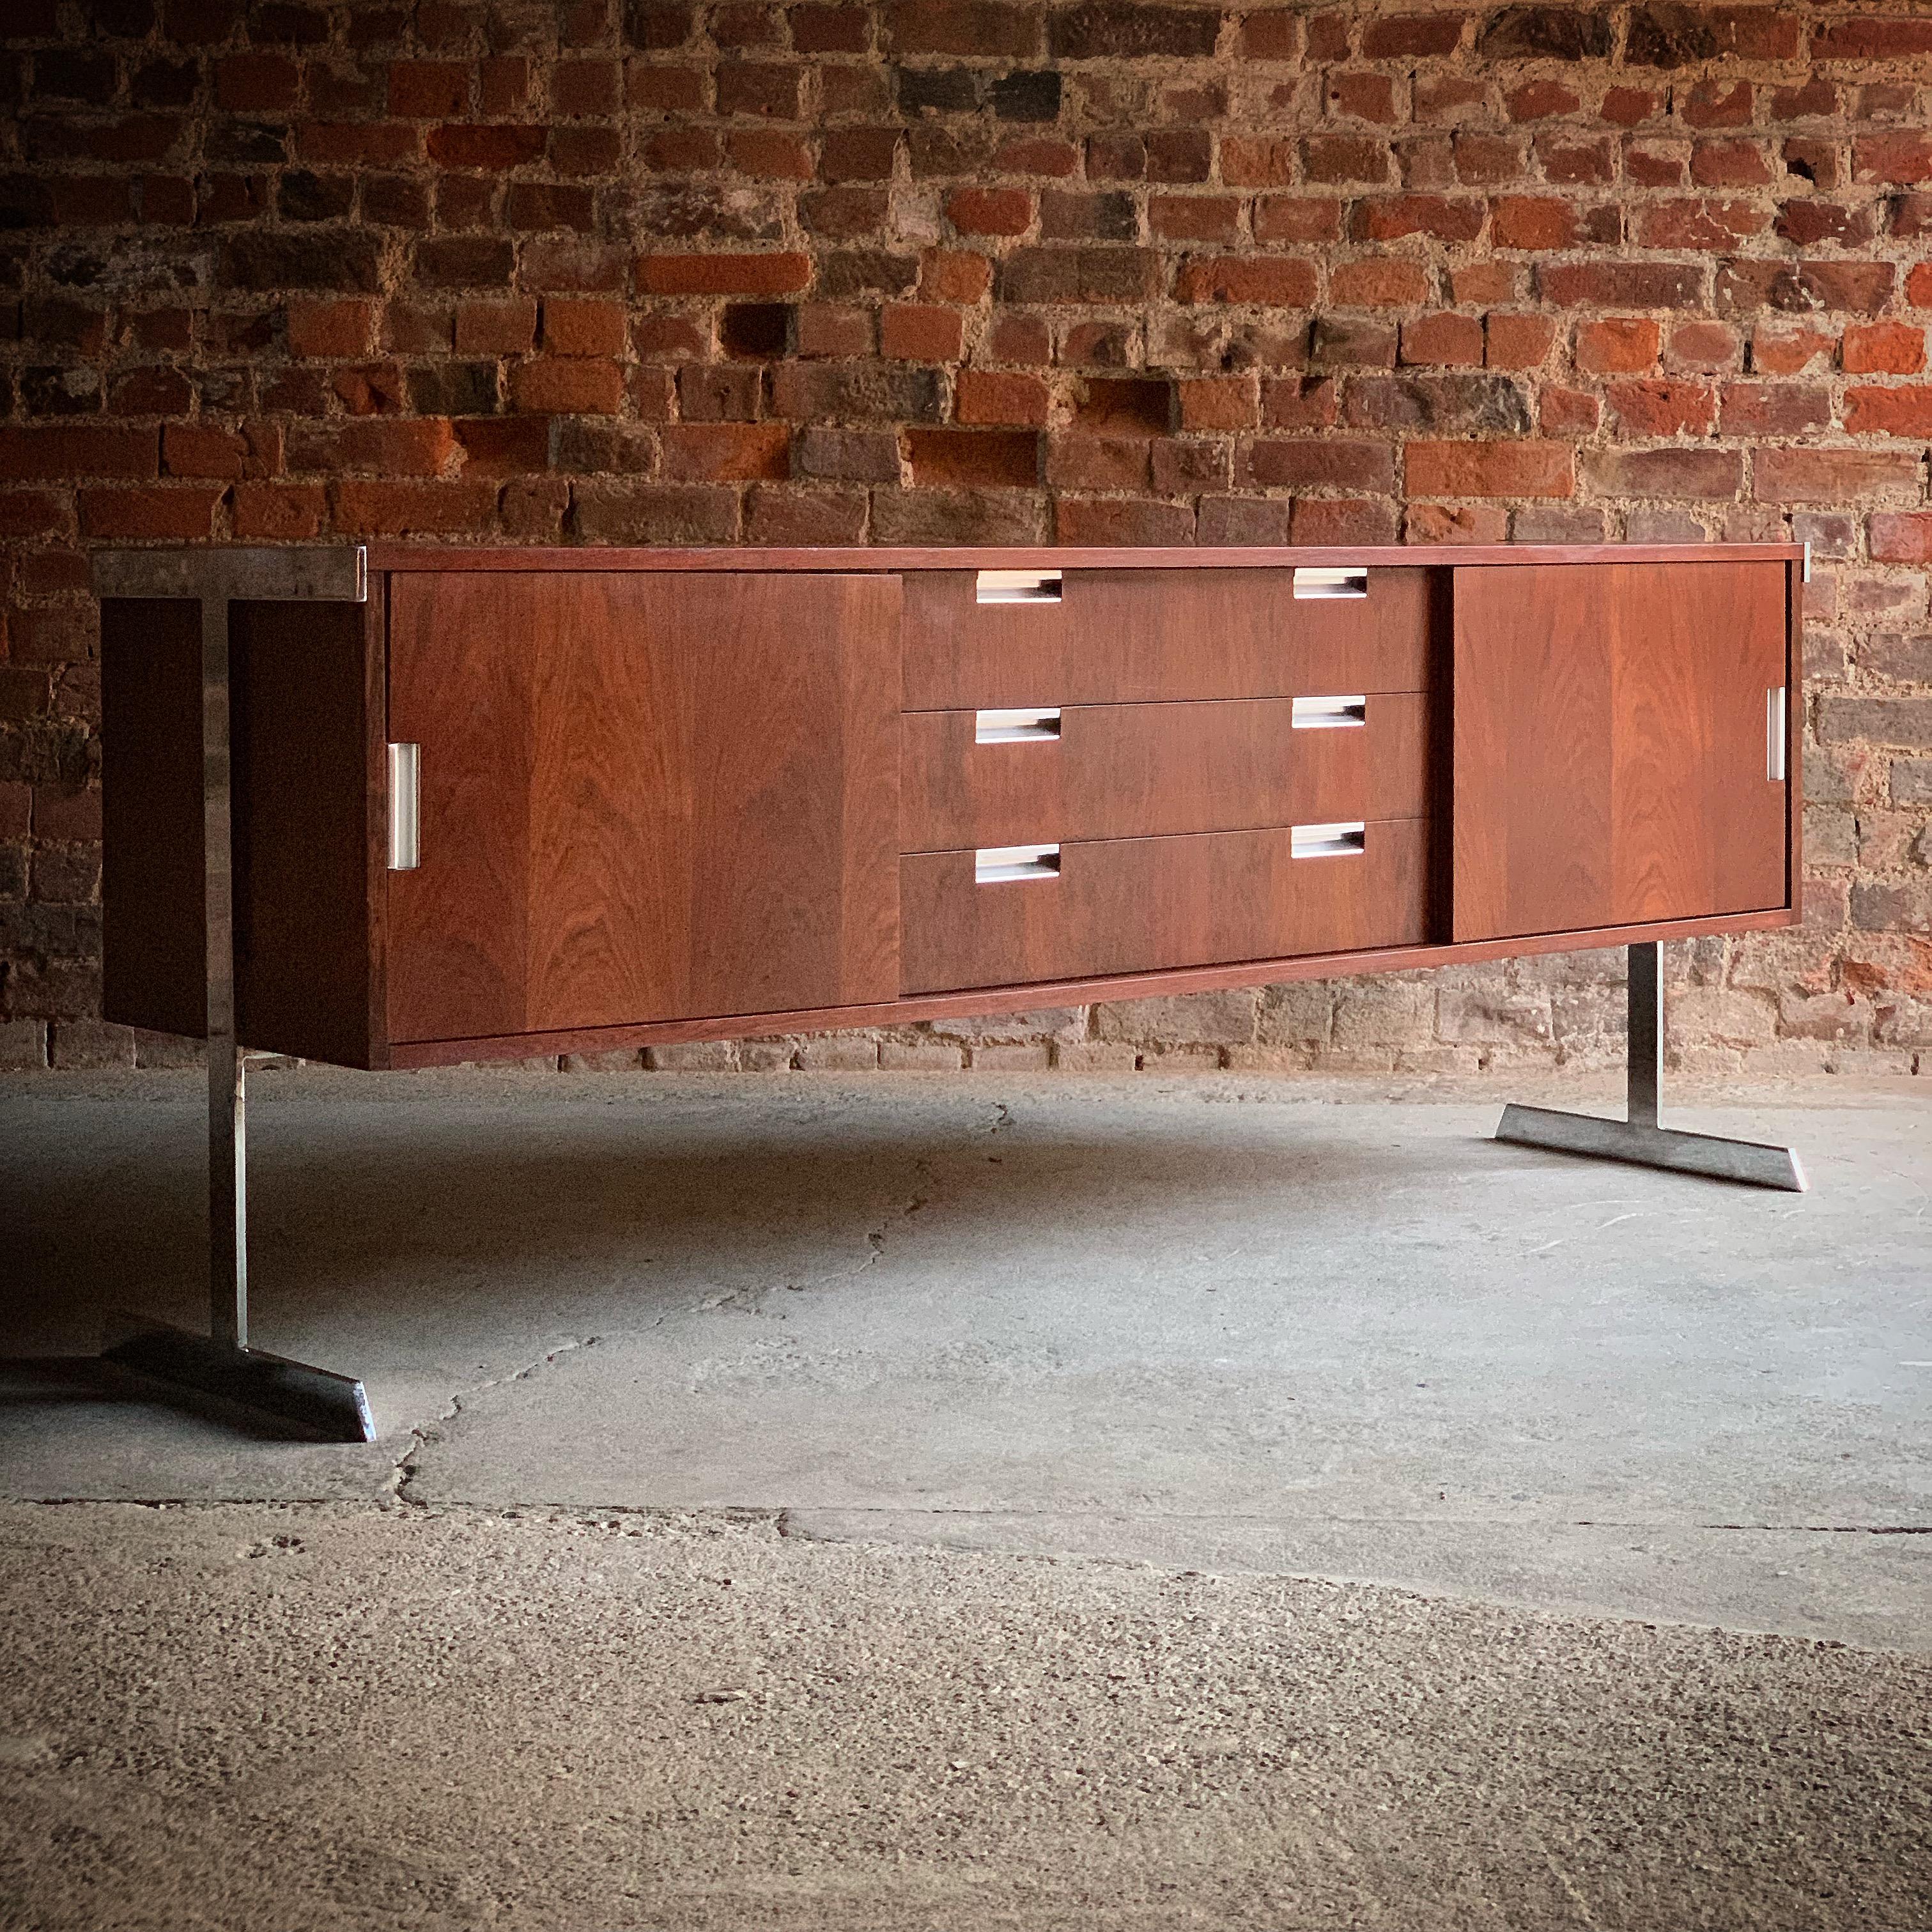 When it comes to coolness in the British furniture world one name stands out above all others and that’s Merrow Associates, our version of Knoll Studio, this super slick, elegant and seriously sought after Merrow Associates sideboard dates to the